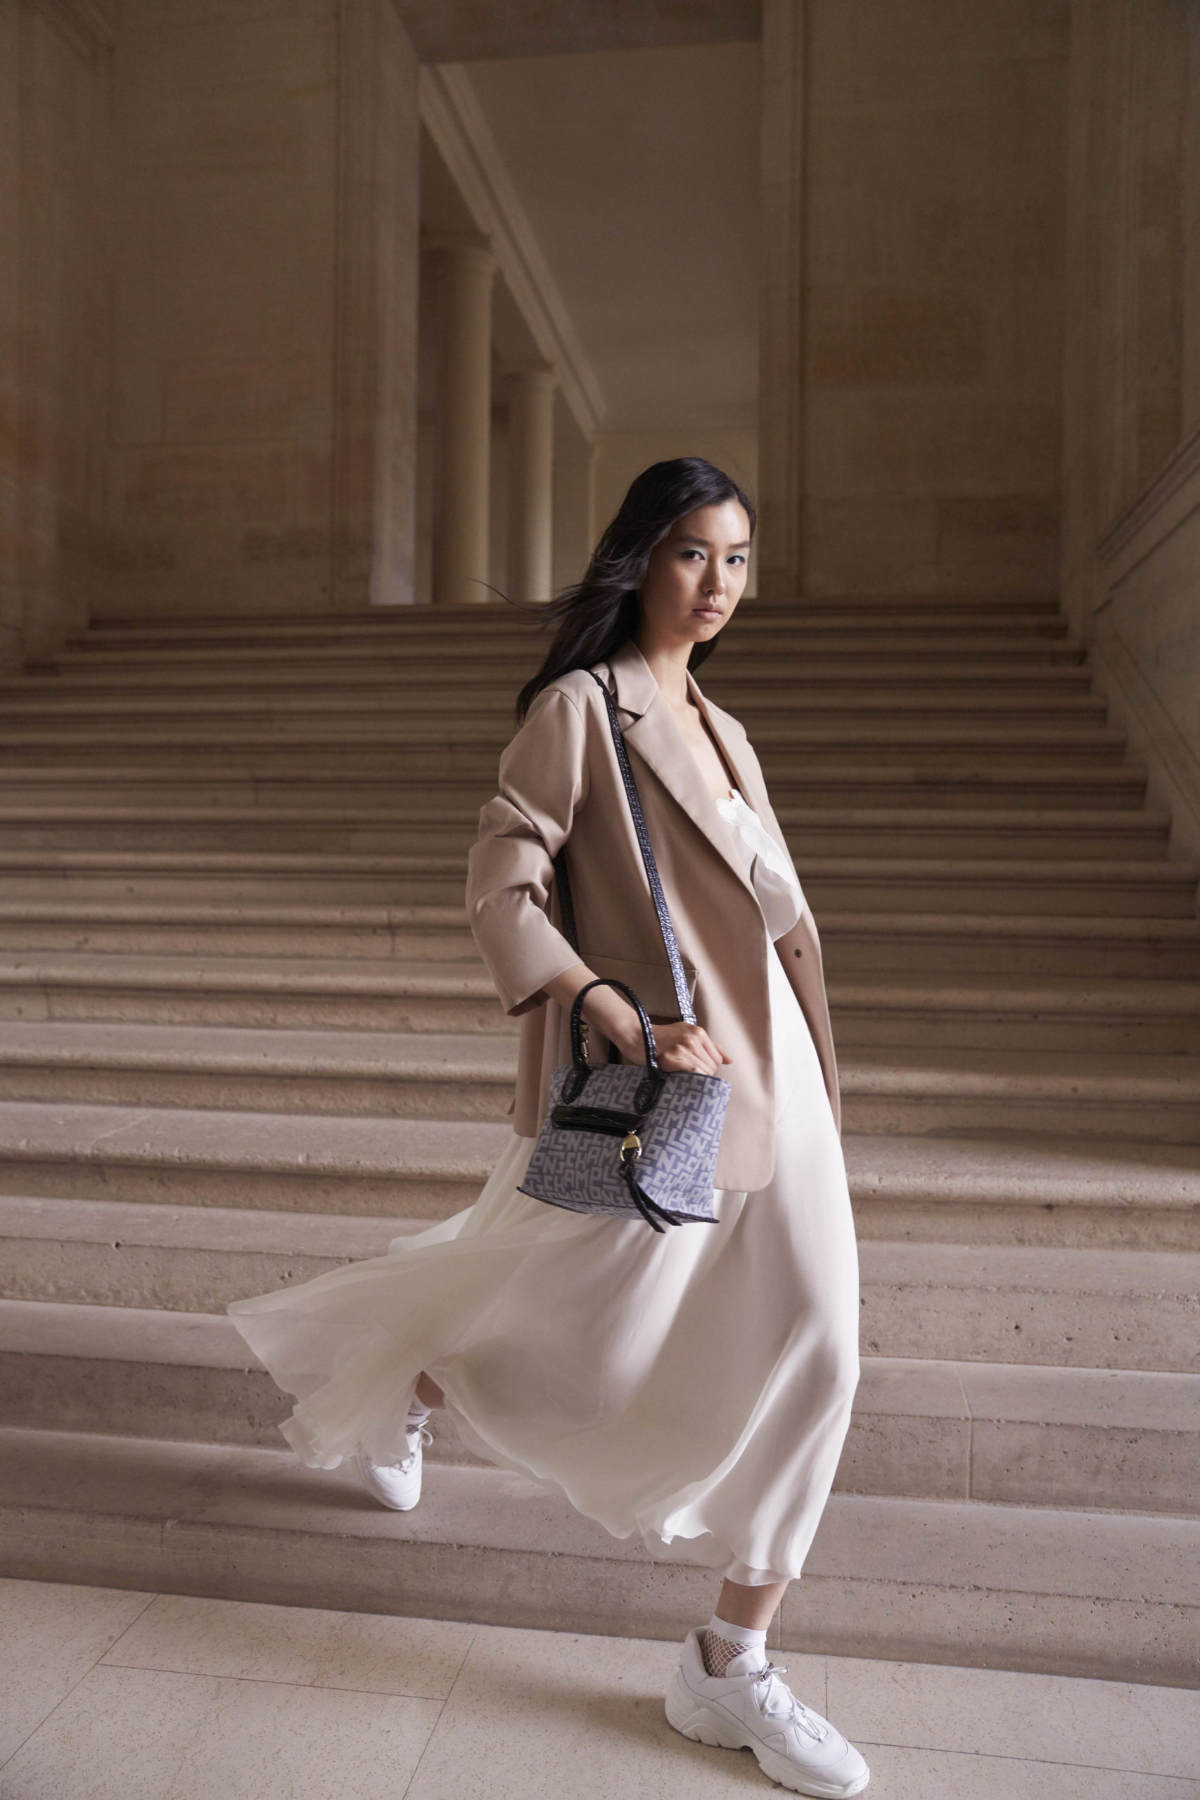 Longchamp's new bags for AW21 are the epitome of Parisian chic